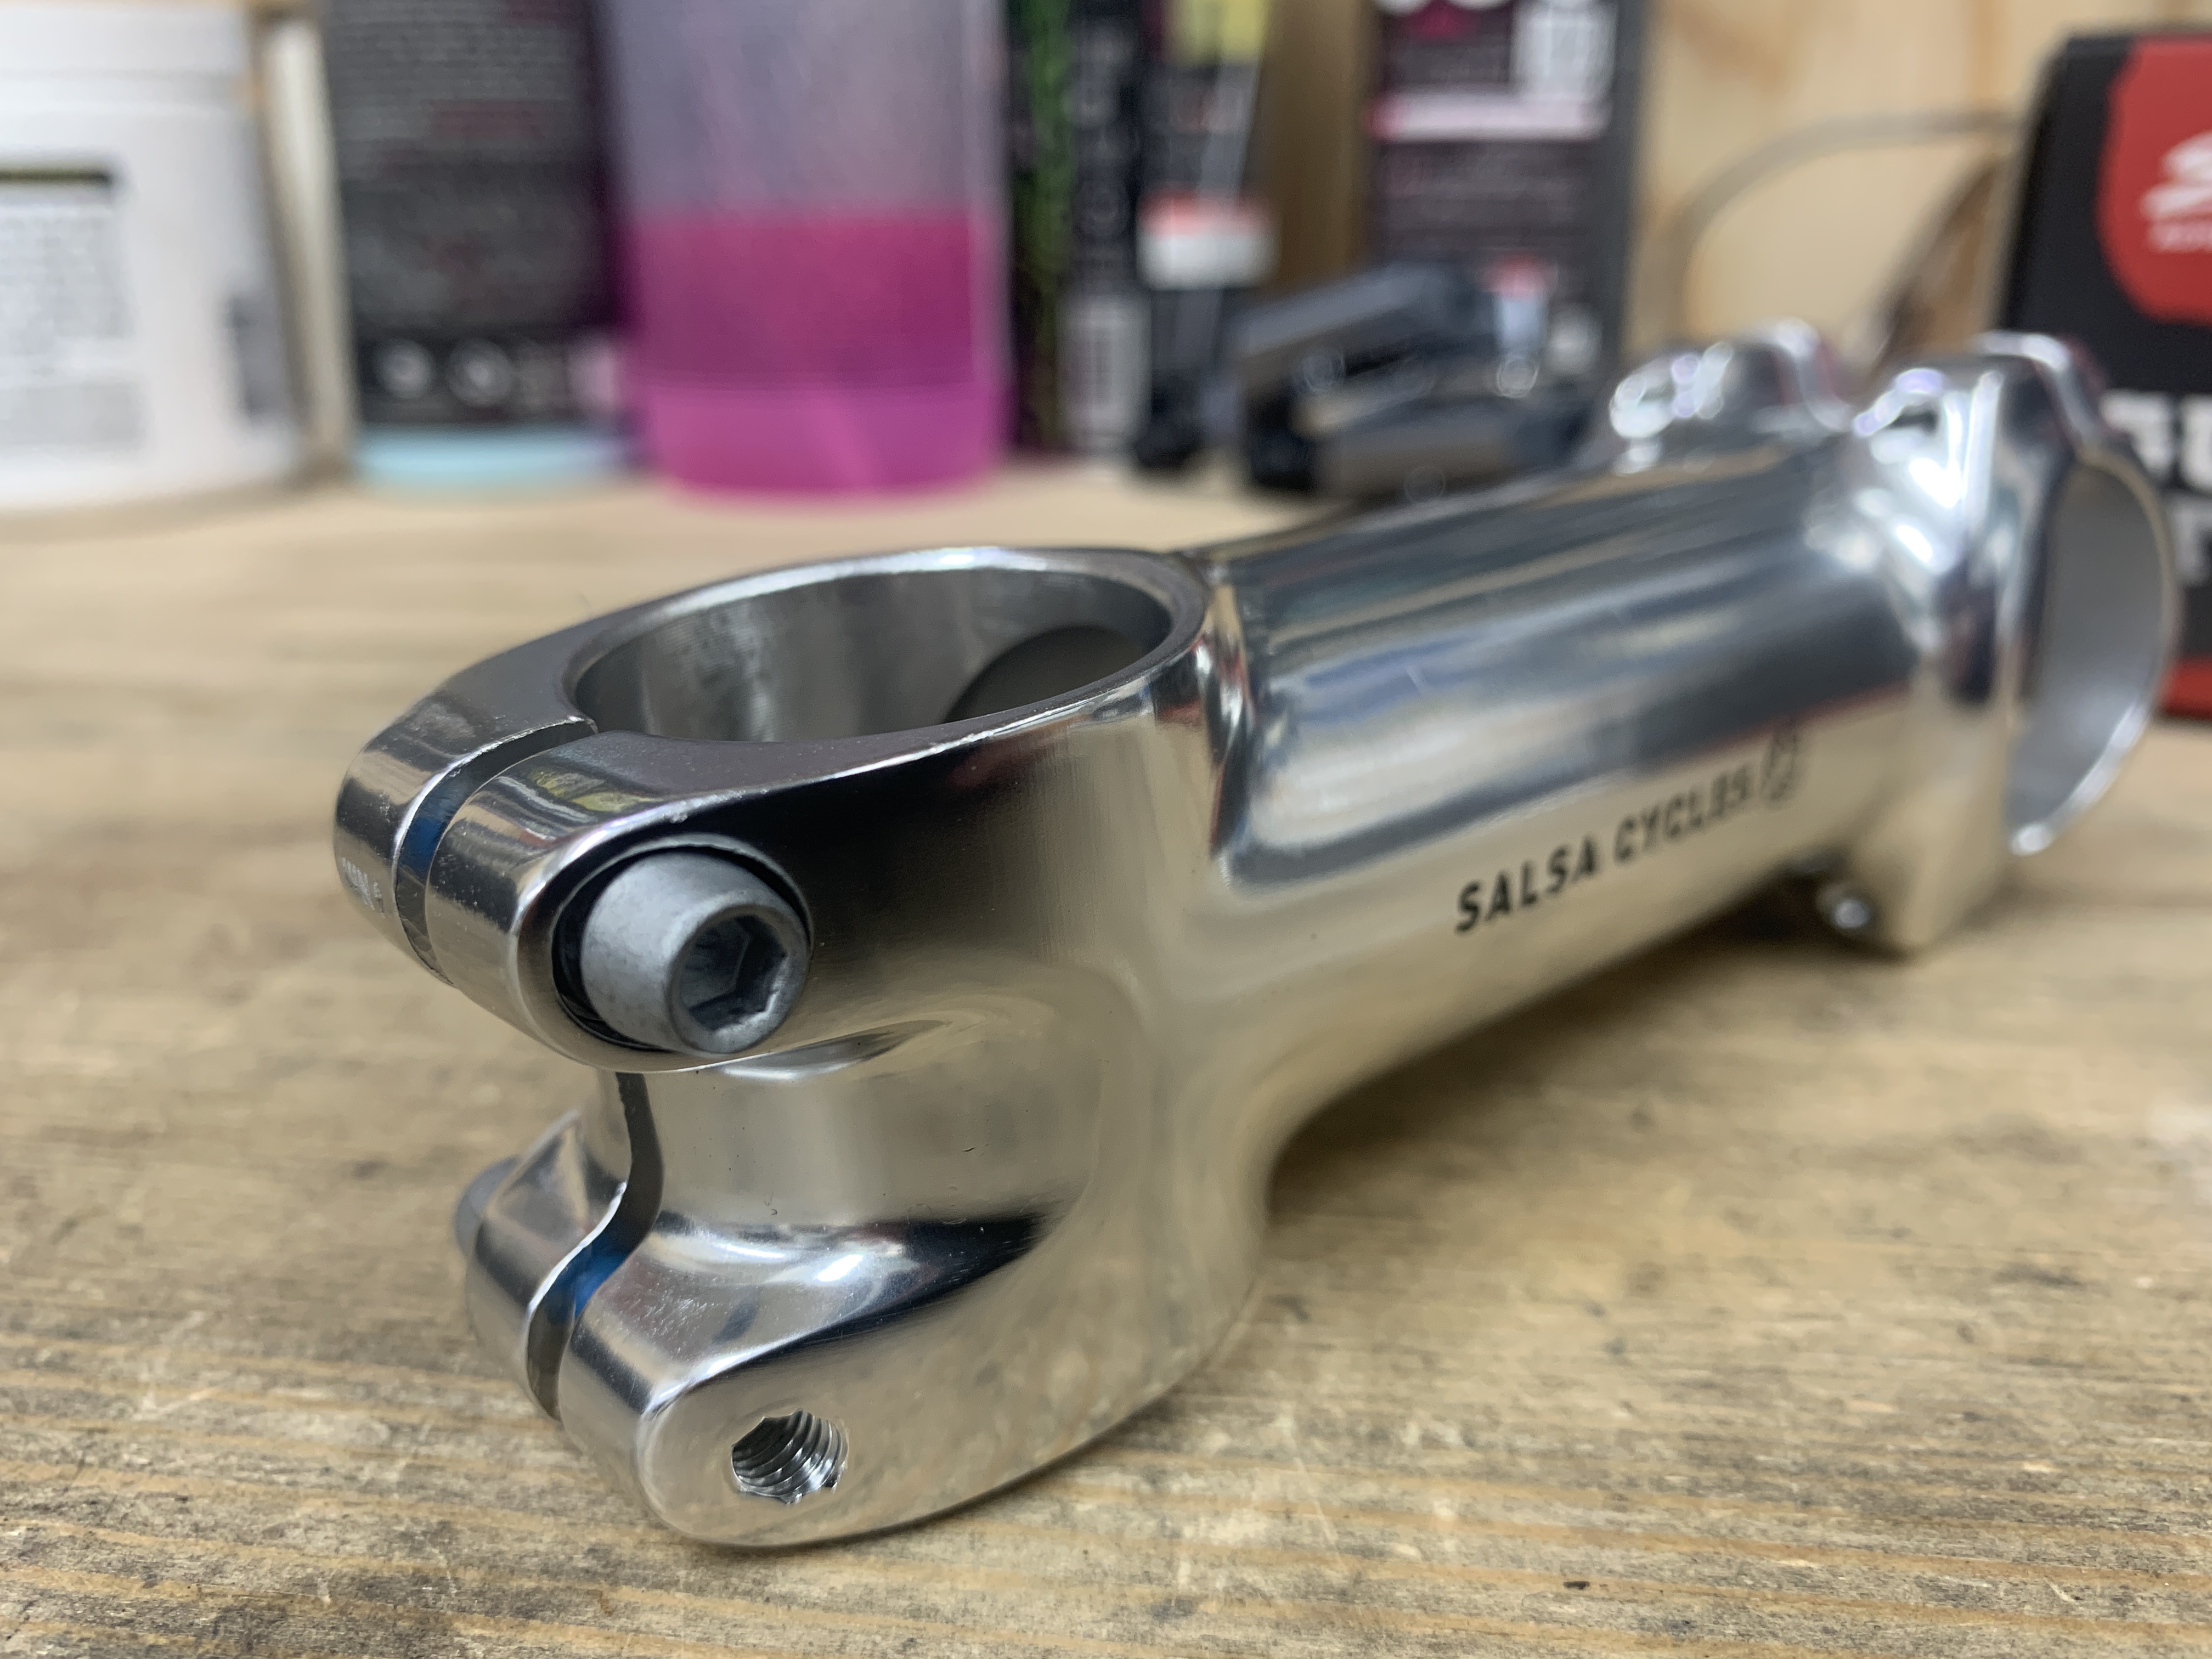 SALSA / GUIDE STEM | Snatch Cycles